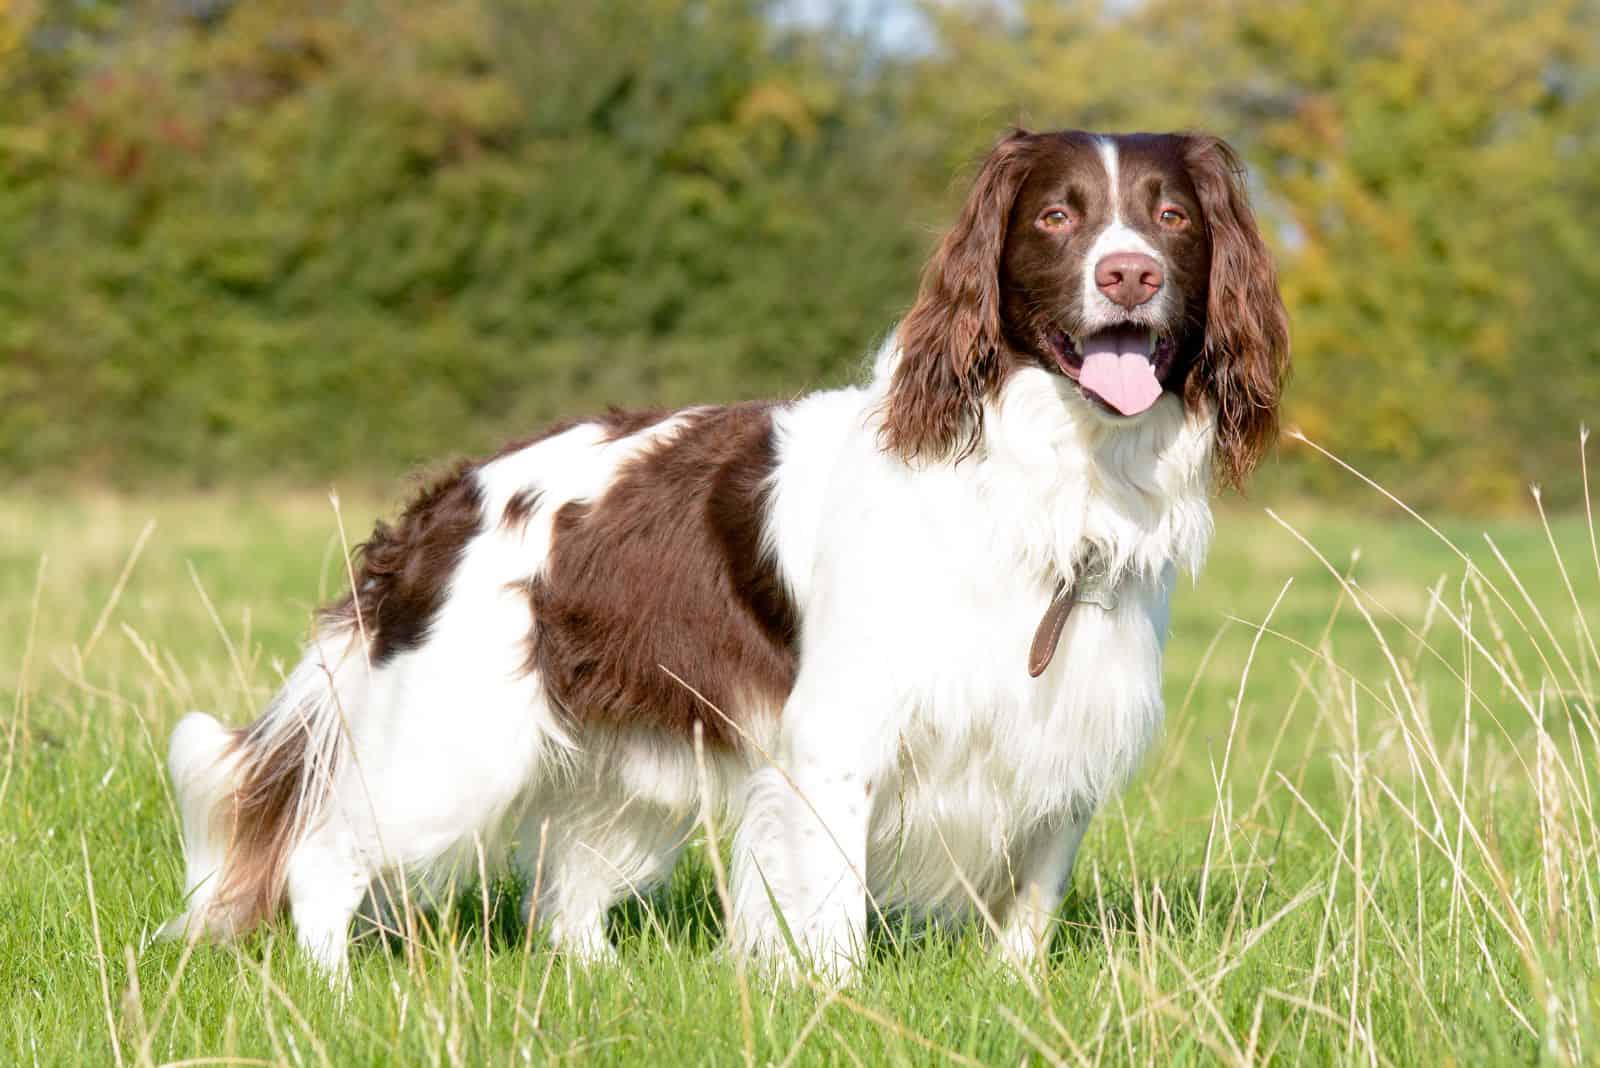 English Springer Spaniel standing in a field